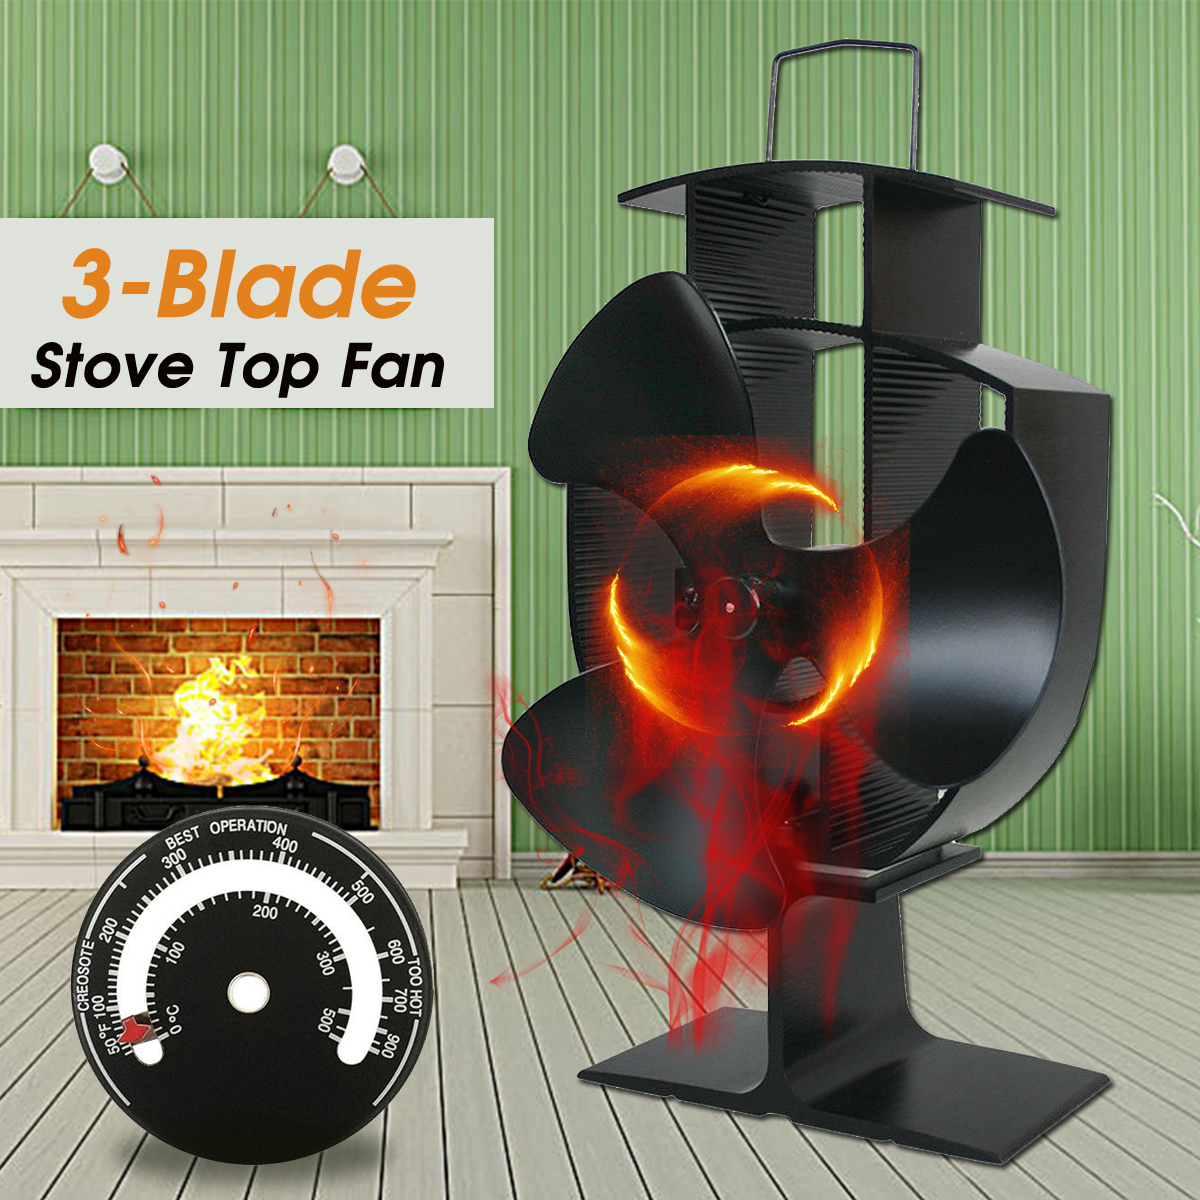 3-Blade-Heat-Powered-Stove-Fan-W-Thermometer-for-Wood-Log-Burning-Burner-Stove-1405753-1